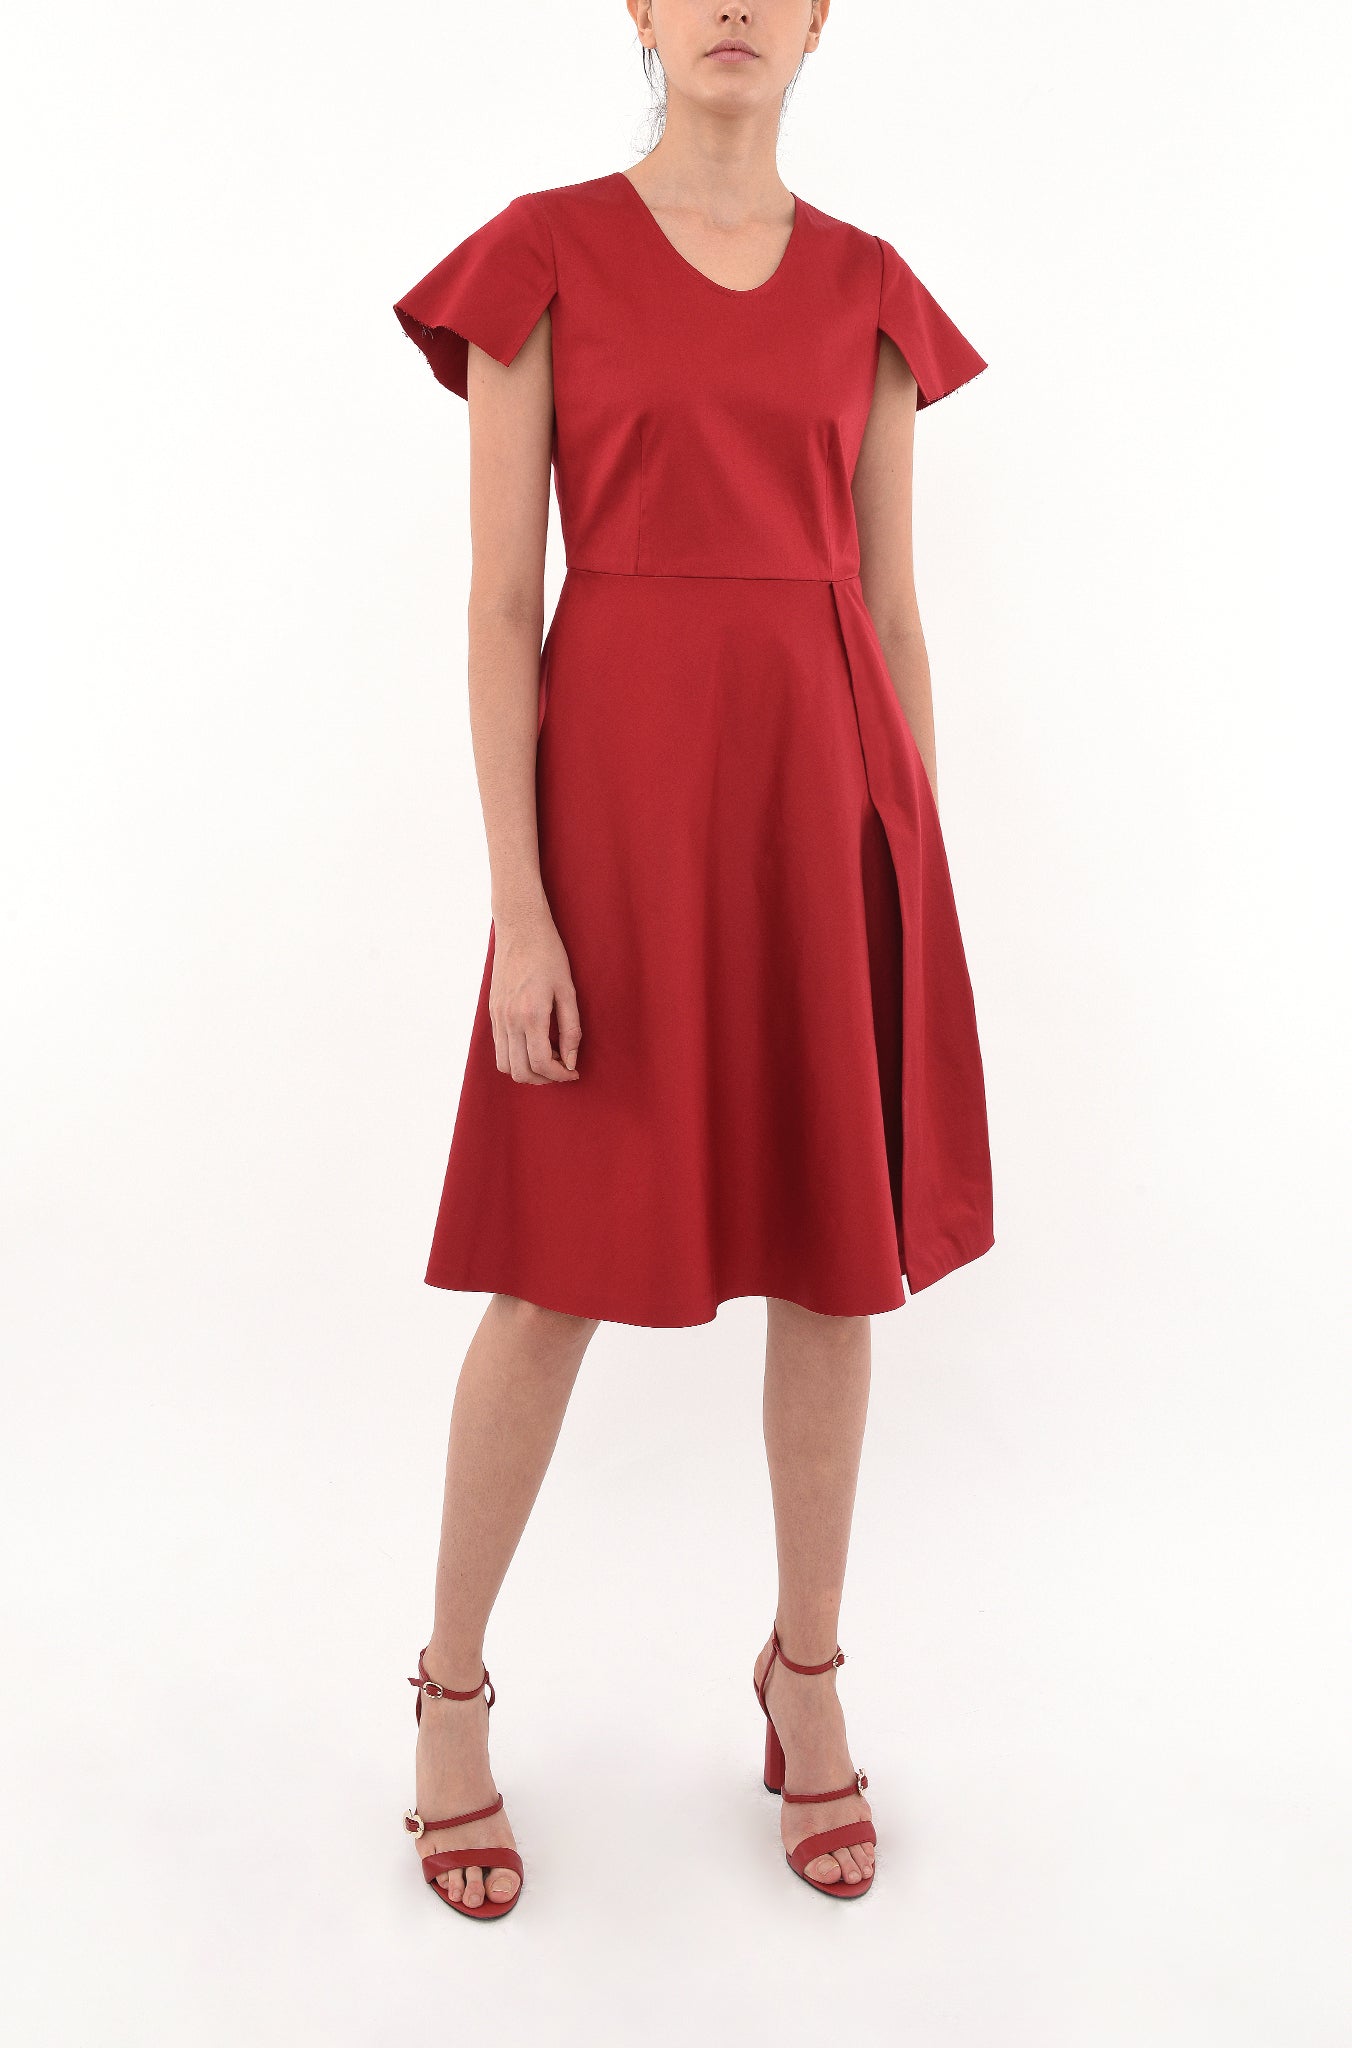 FIT-FLARE DRESS WITH CUT-AWAY SLEEVES